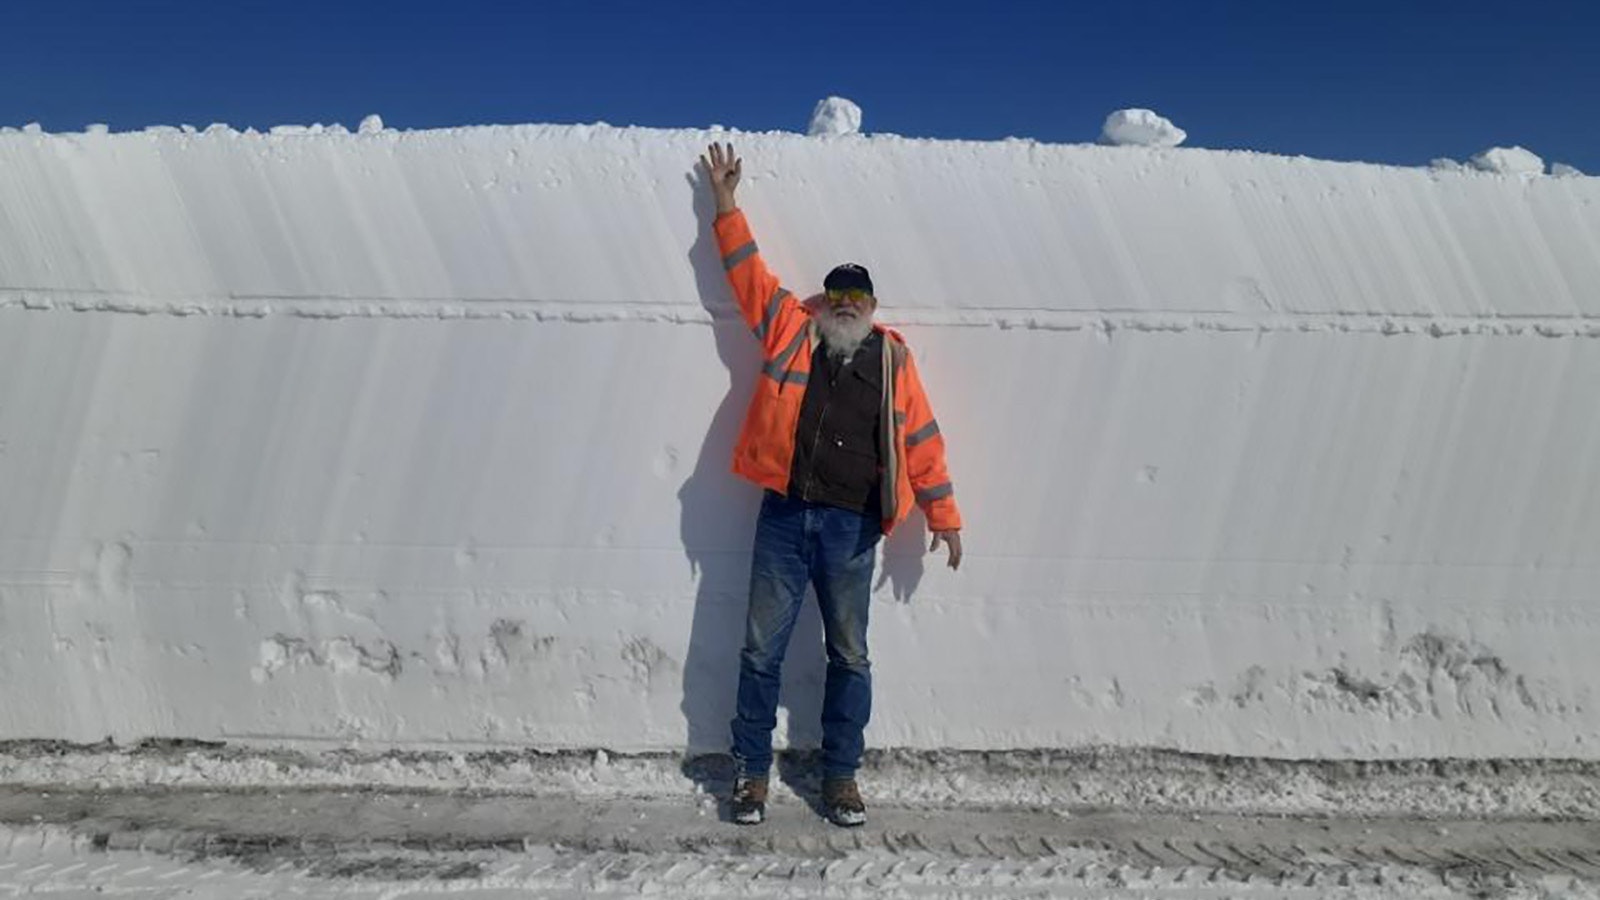 The snow along some sections of Wyoming highways measured feet, not inches, this past winter.